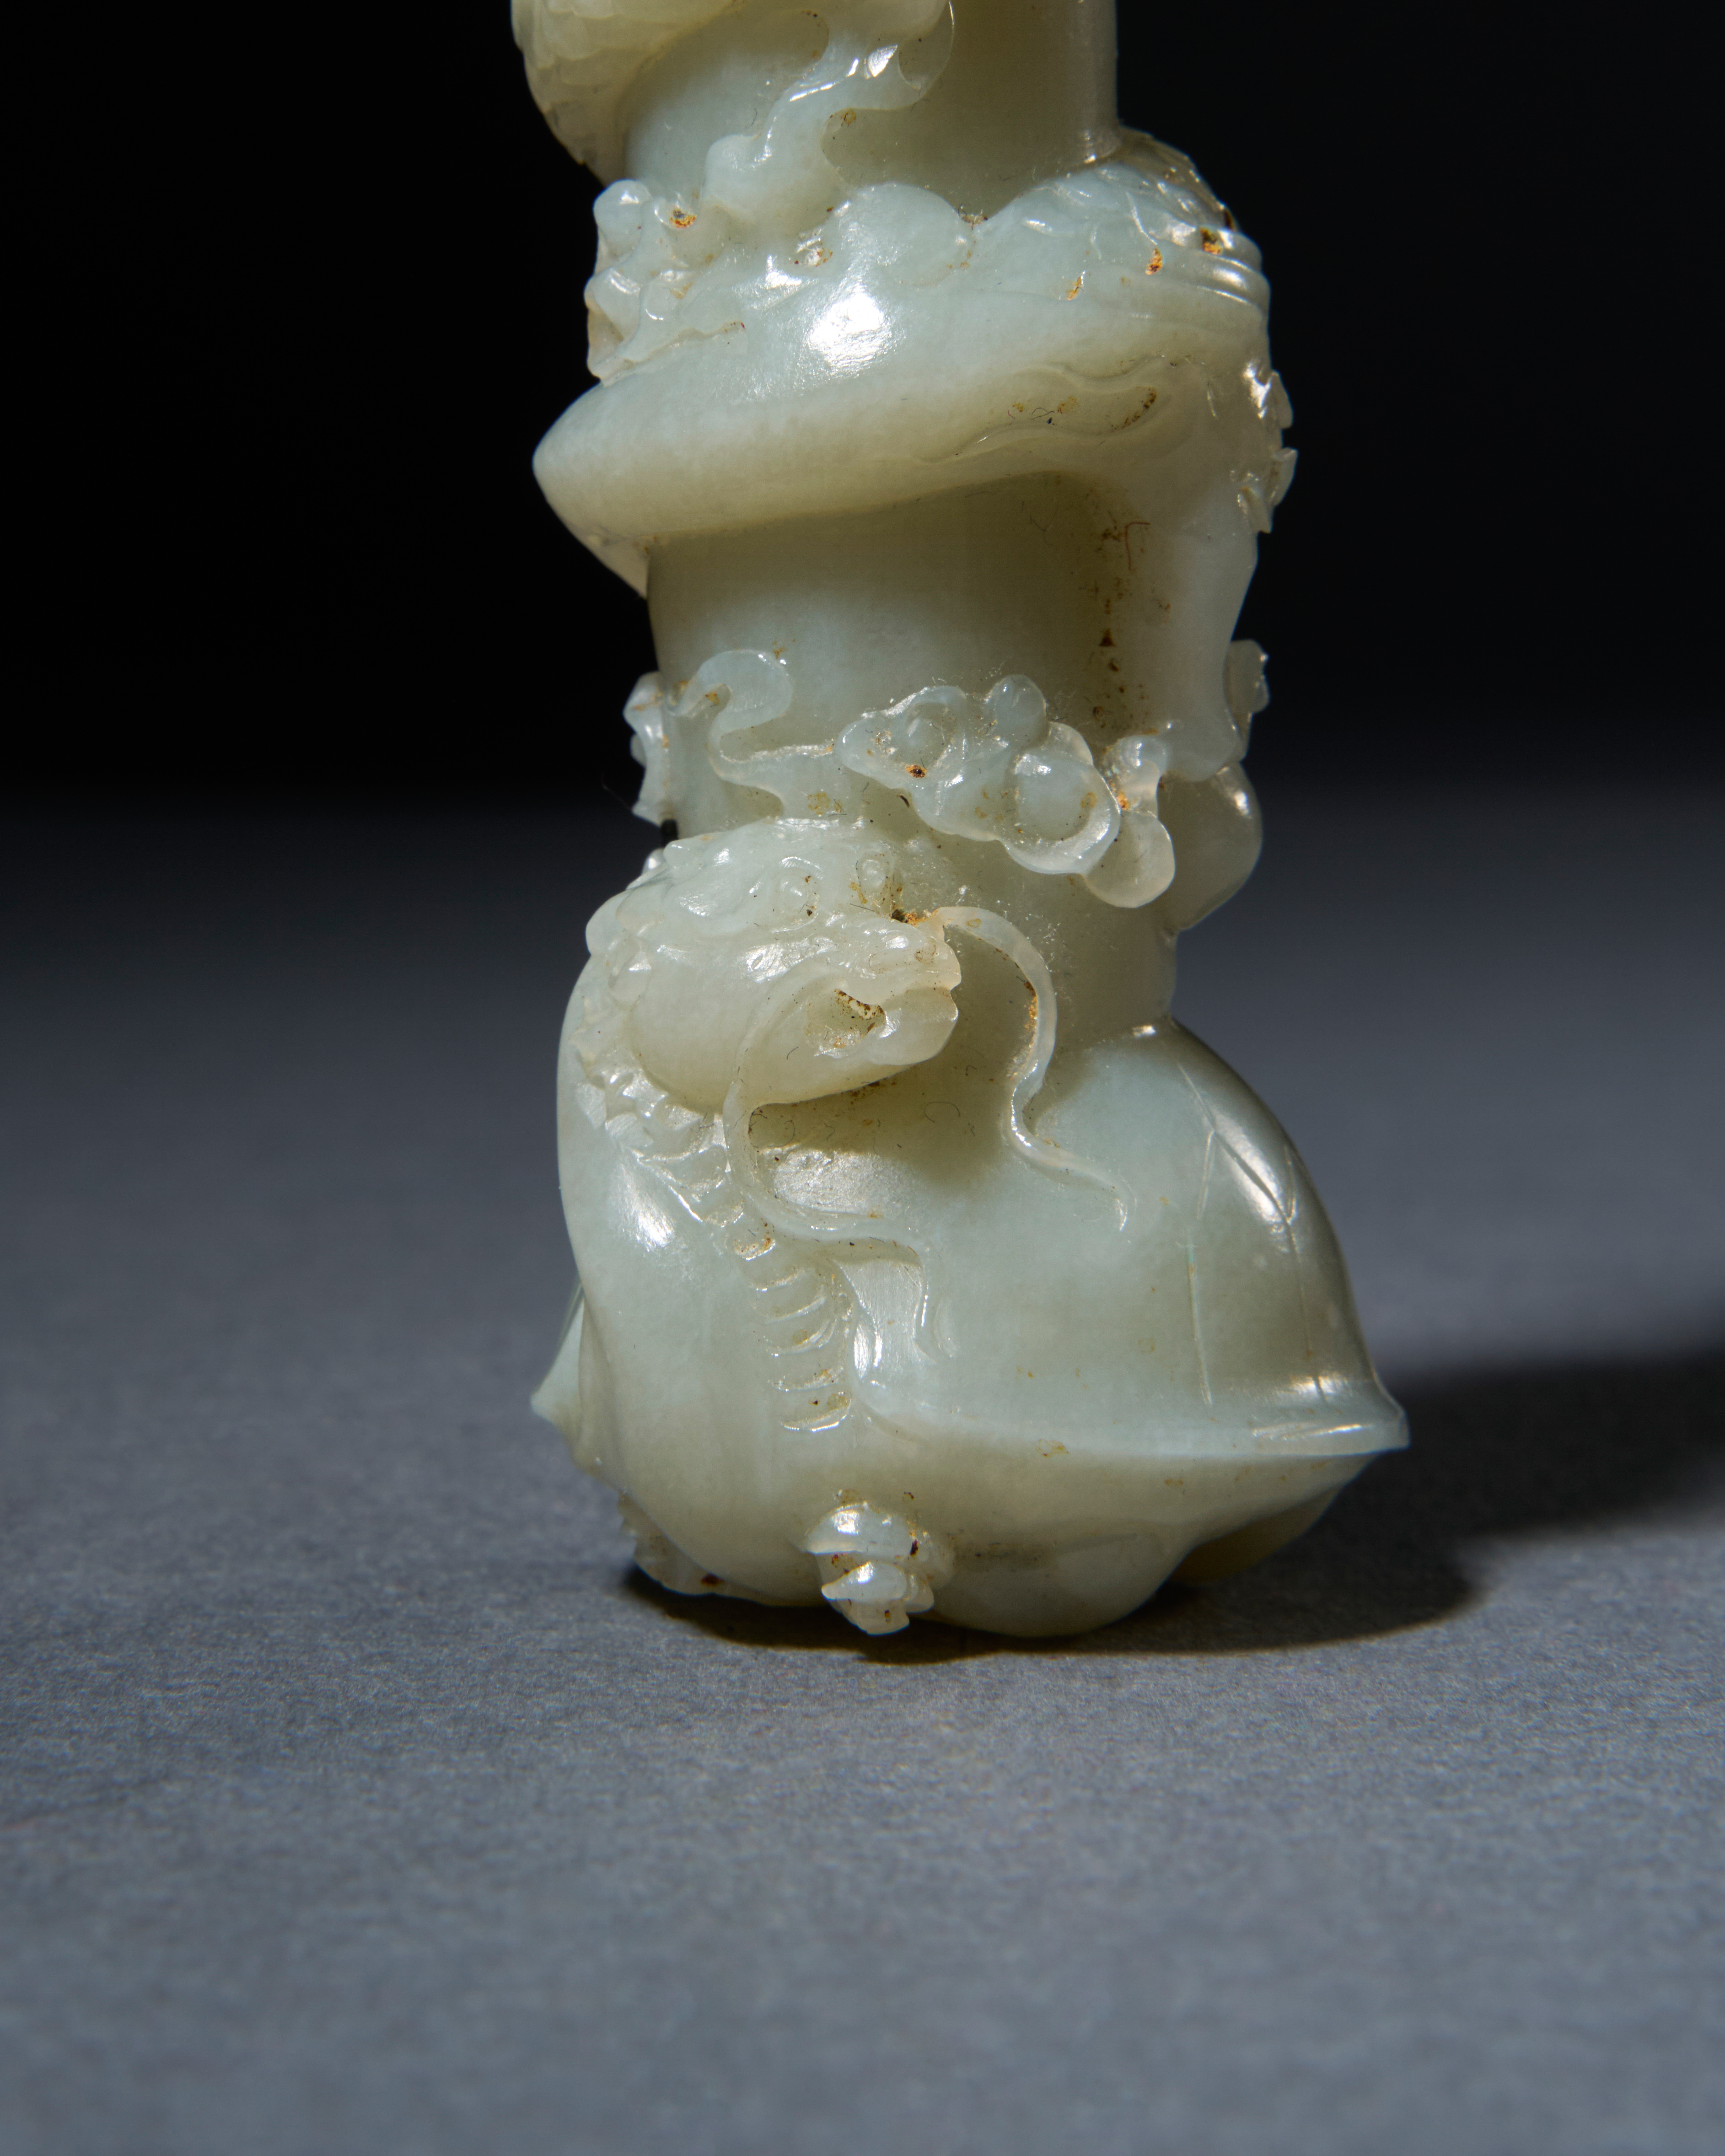 A LARGE CHINESE JADE "DRAGON" HANDLE, QING DYNASTY (1644-1911) - Image 3 of 4